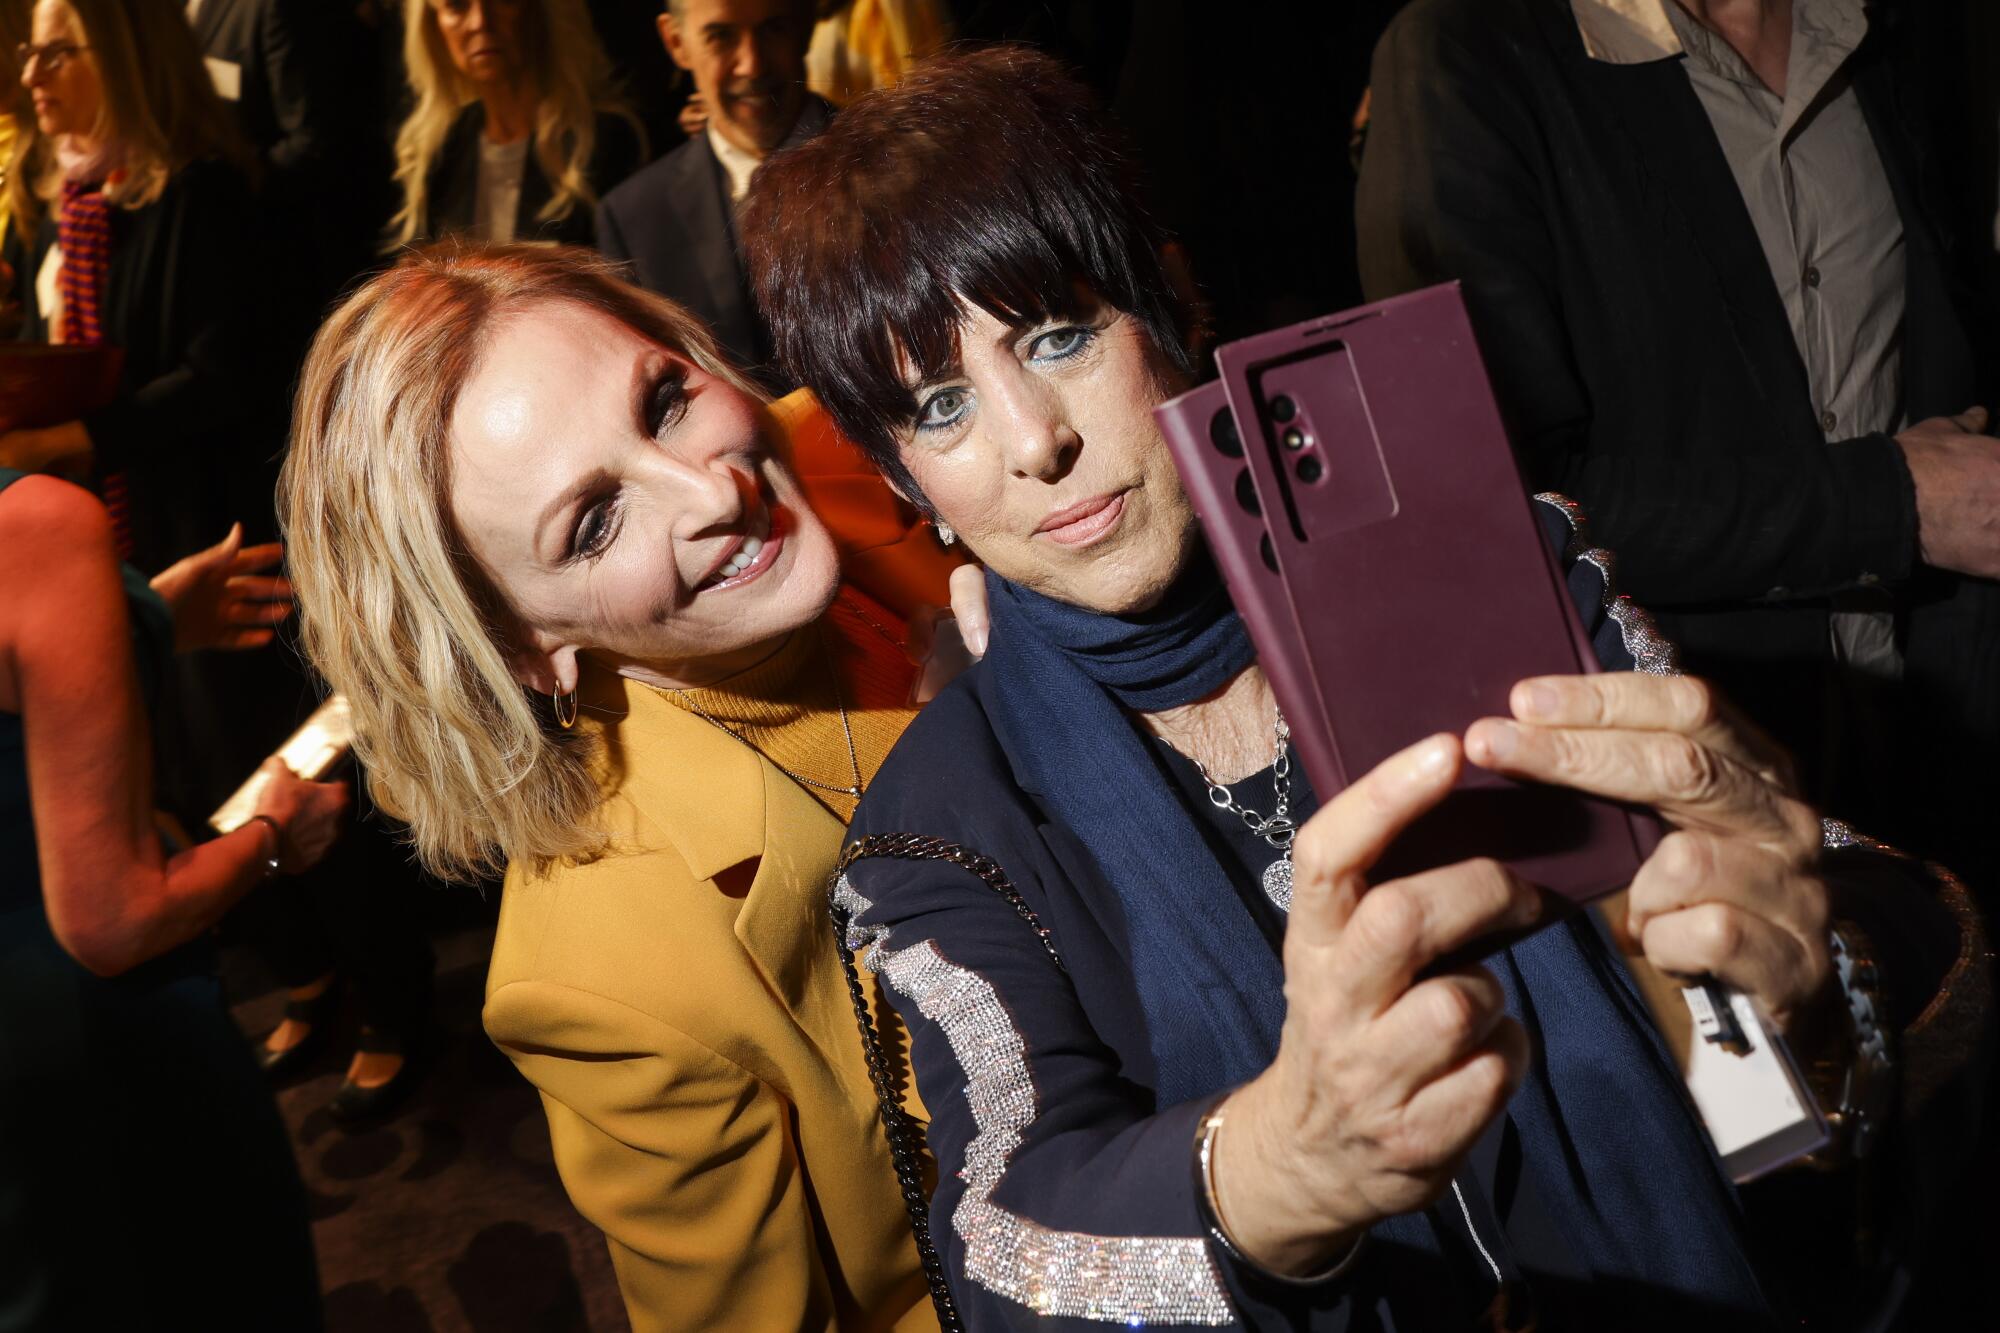 A blond woman stands behind a brunette woman as they pose for a selfie.